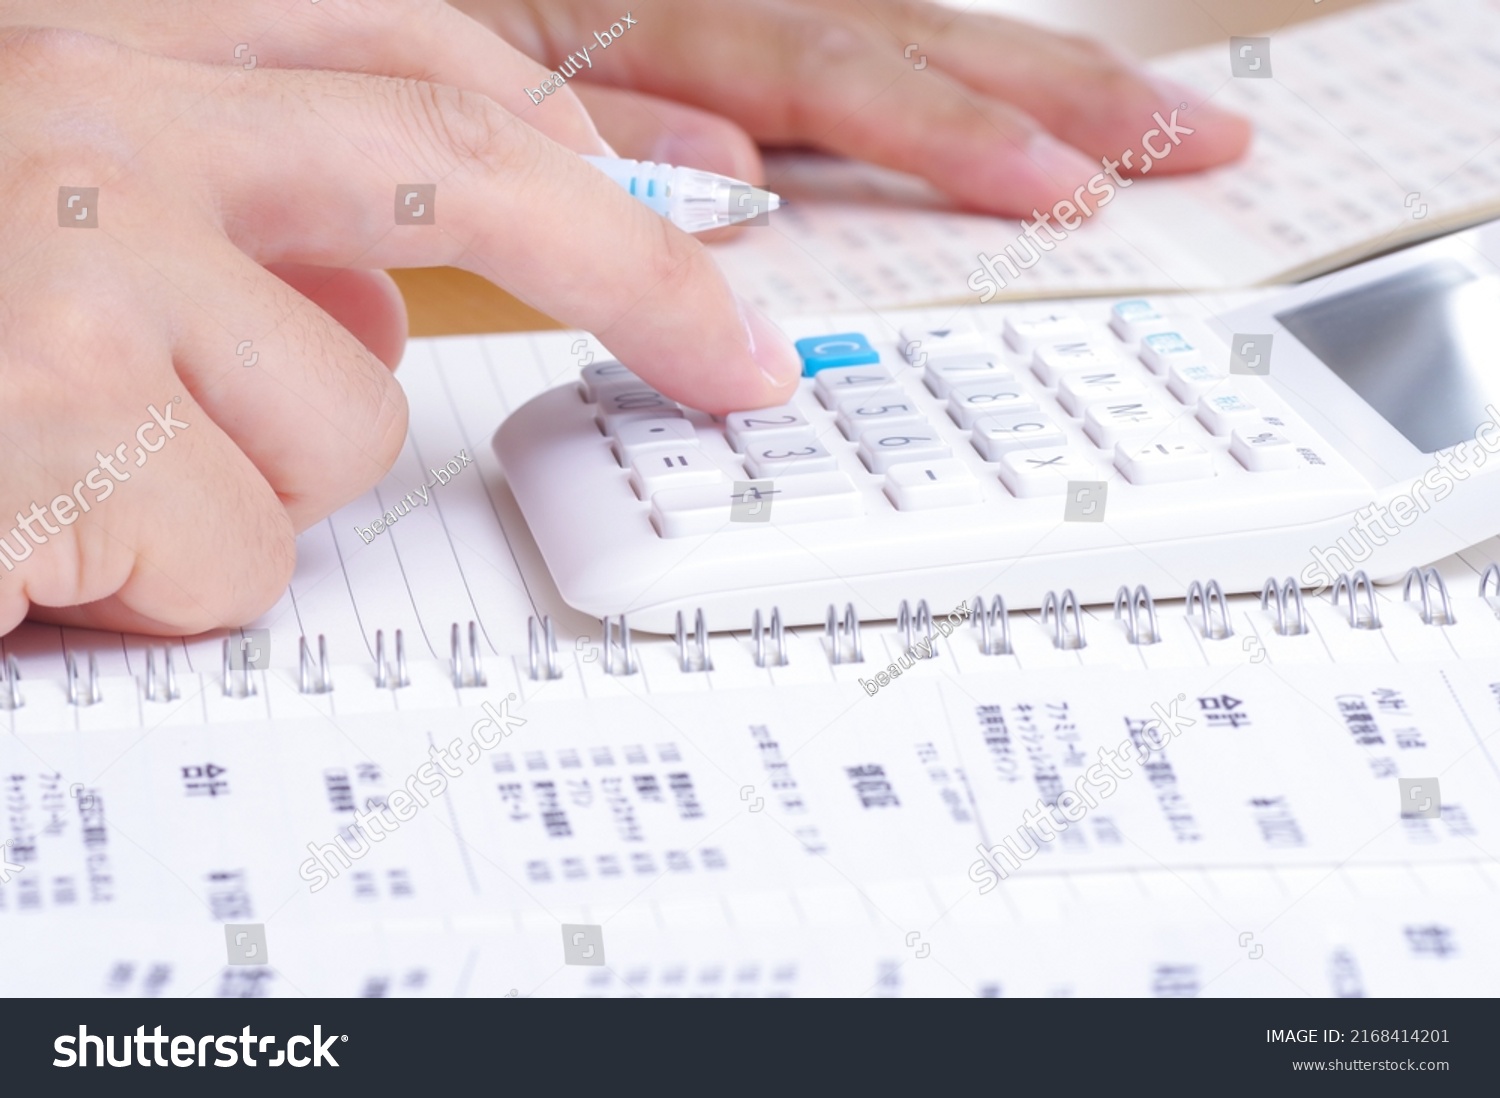 A person who calculates with a calculator while looking at shopping receipts and passbooks written in Japanese #2168414201